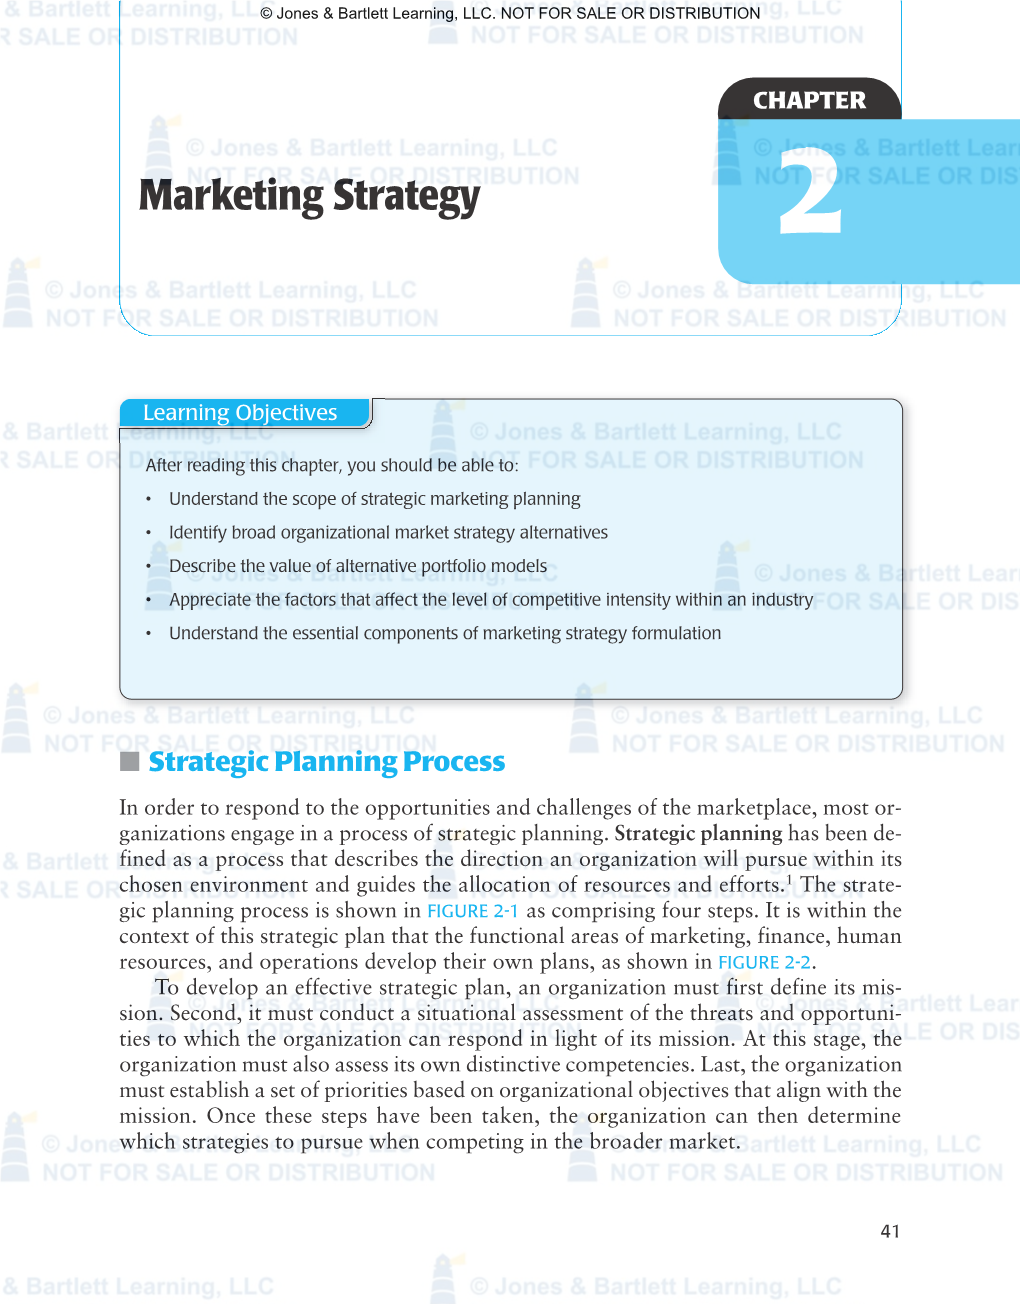 Marketing Strategy Learning Objectives 2